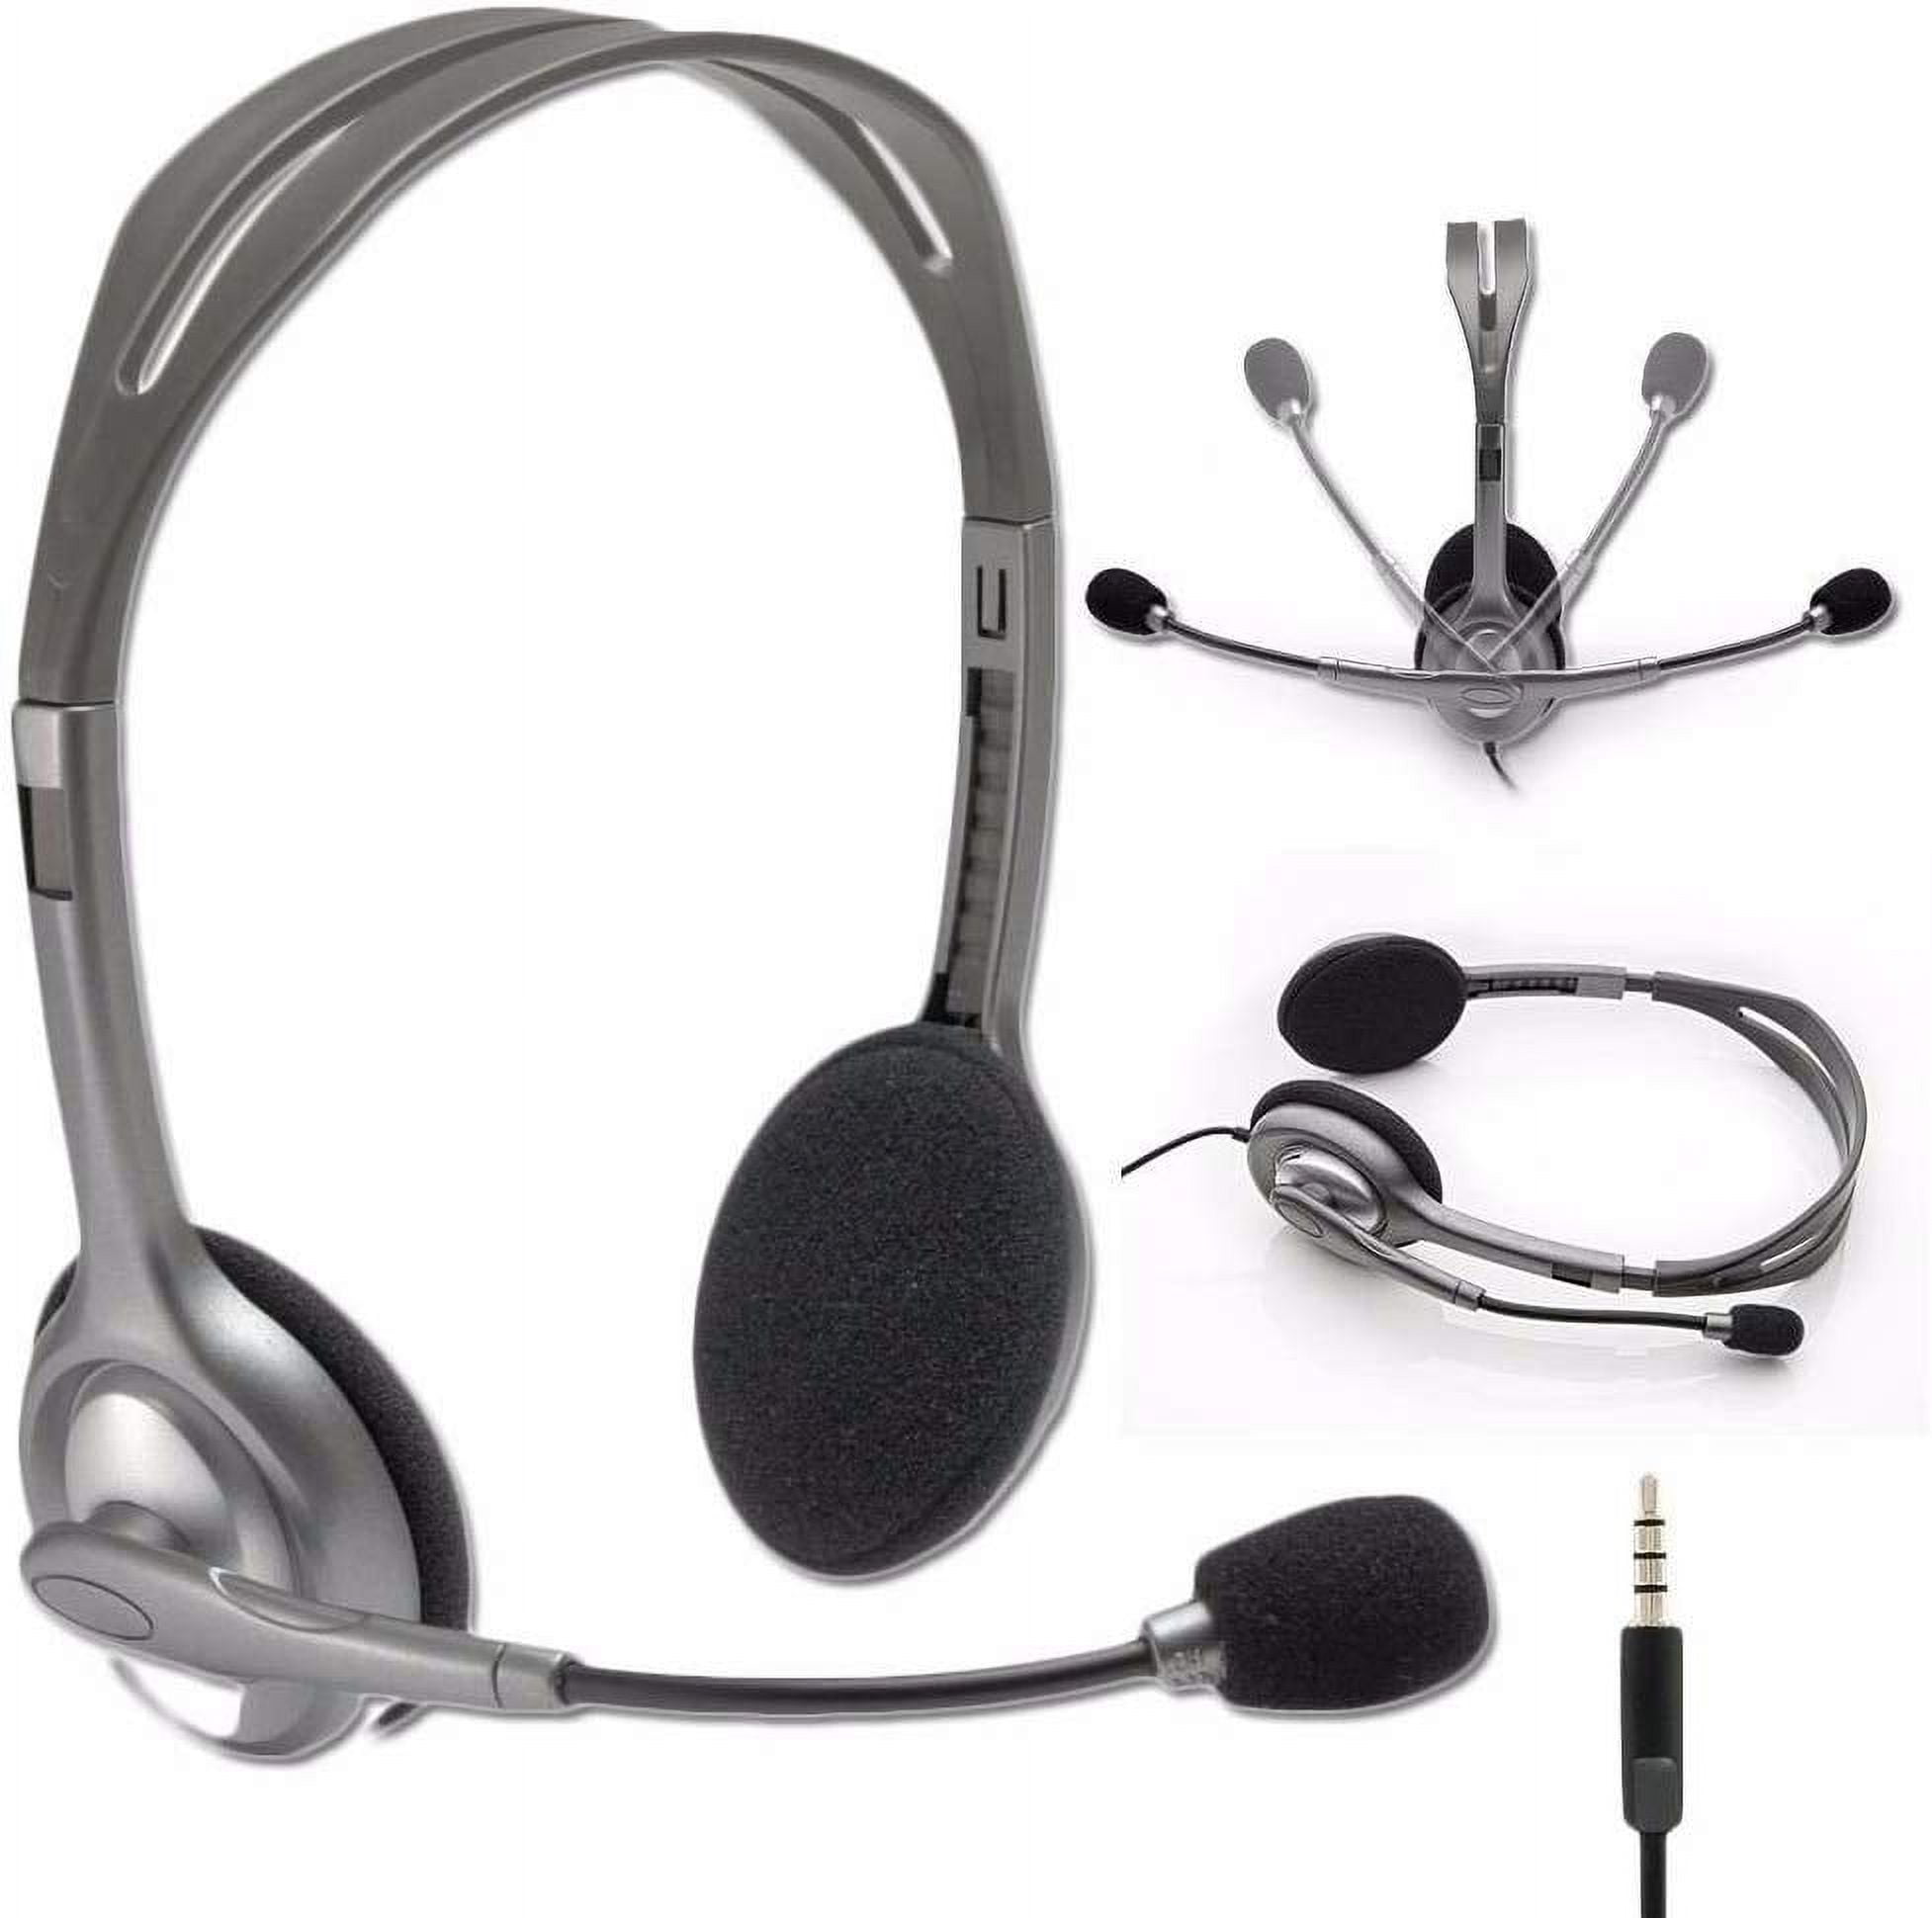 Cancelling Microphone Stereo H111/H110 Packaging with - Logitech Headset Noise Bulk